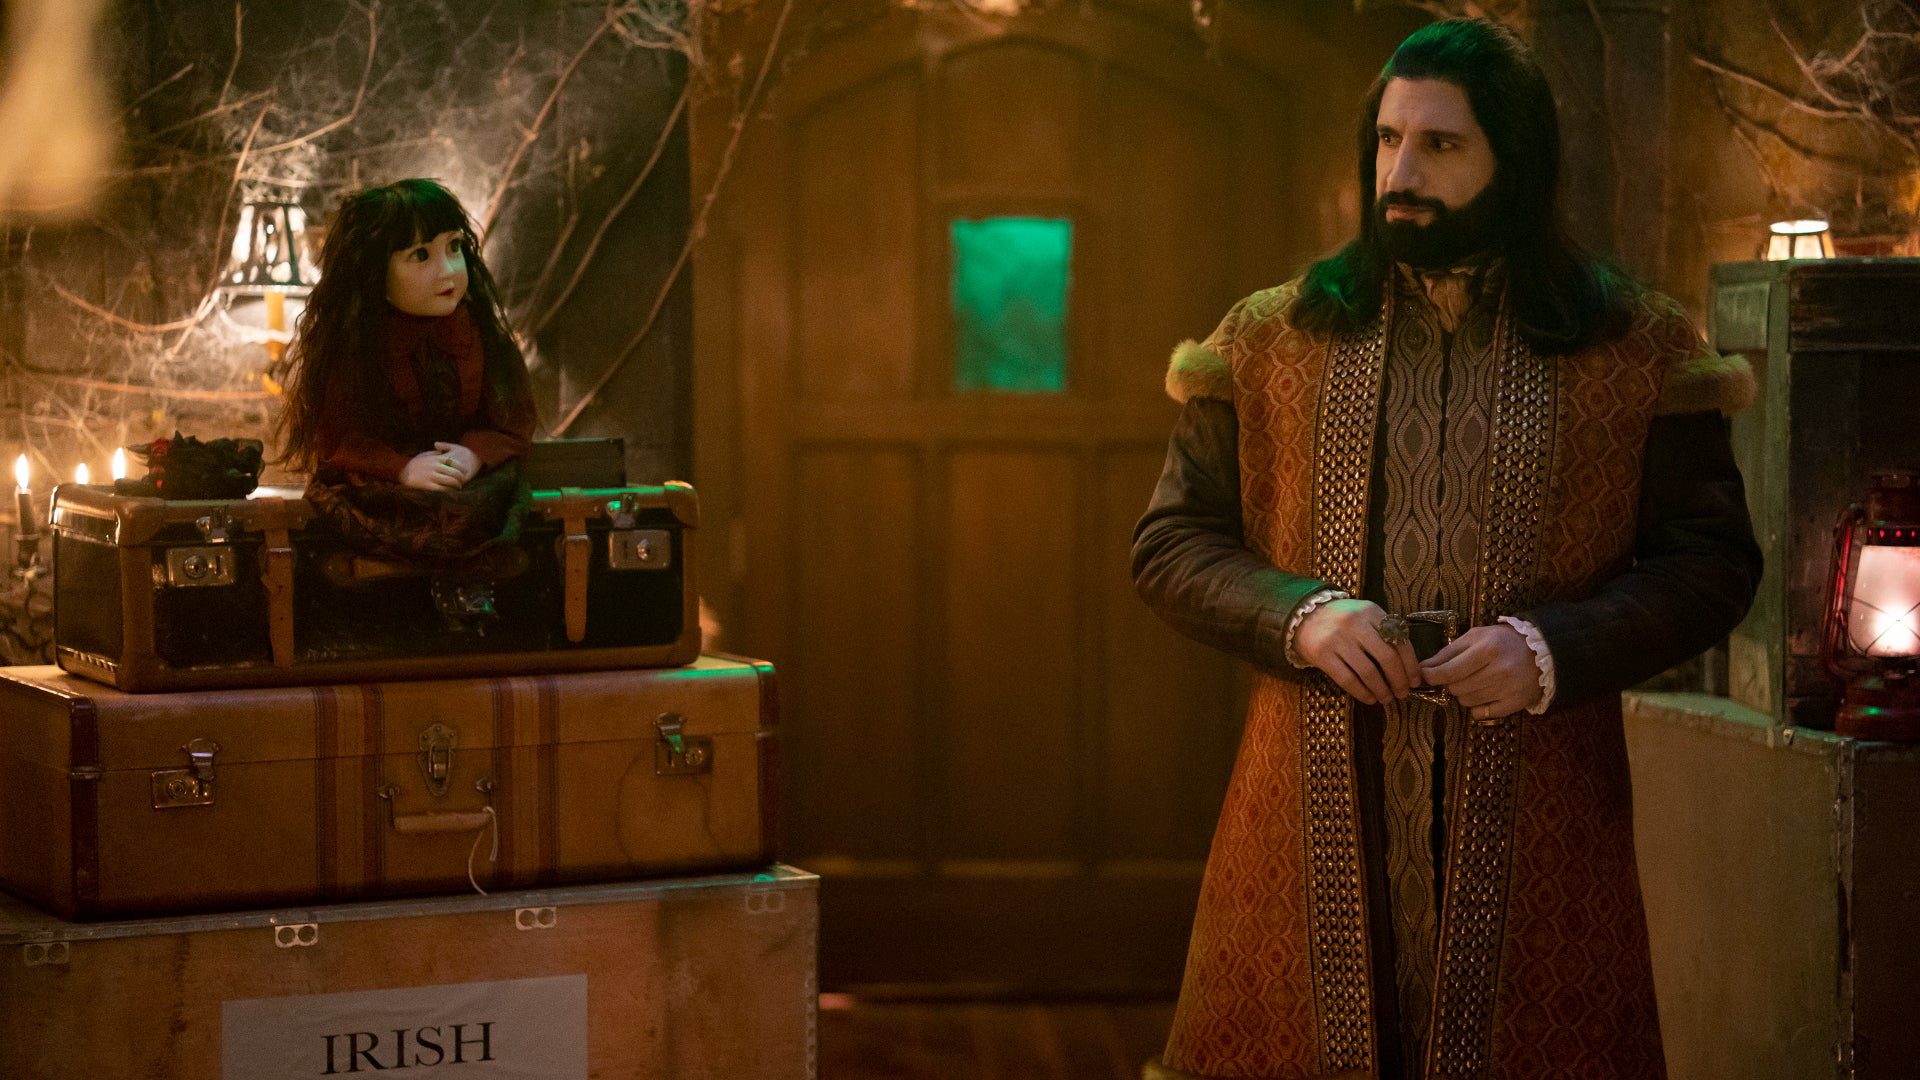 What We Do in the Shadows Season 4 Episode 6 Release Date and Spoilers